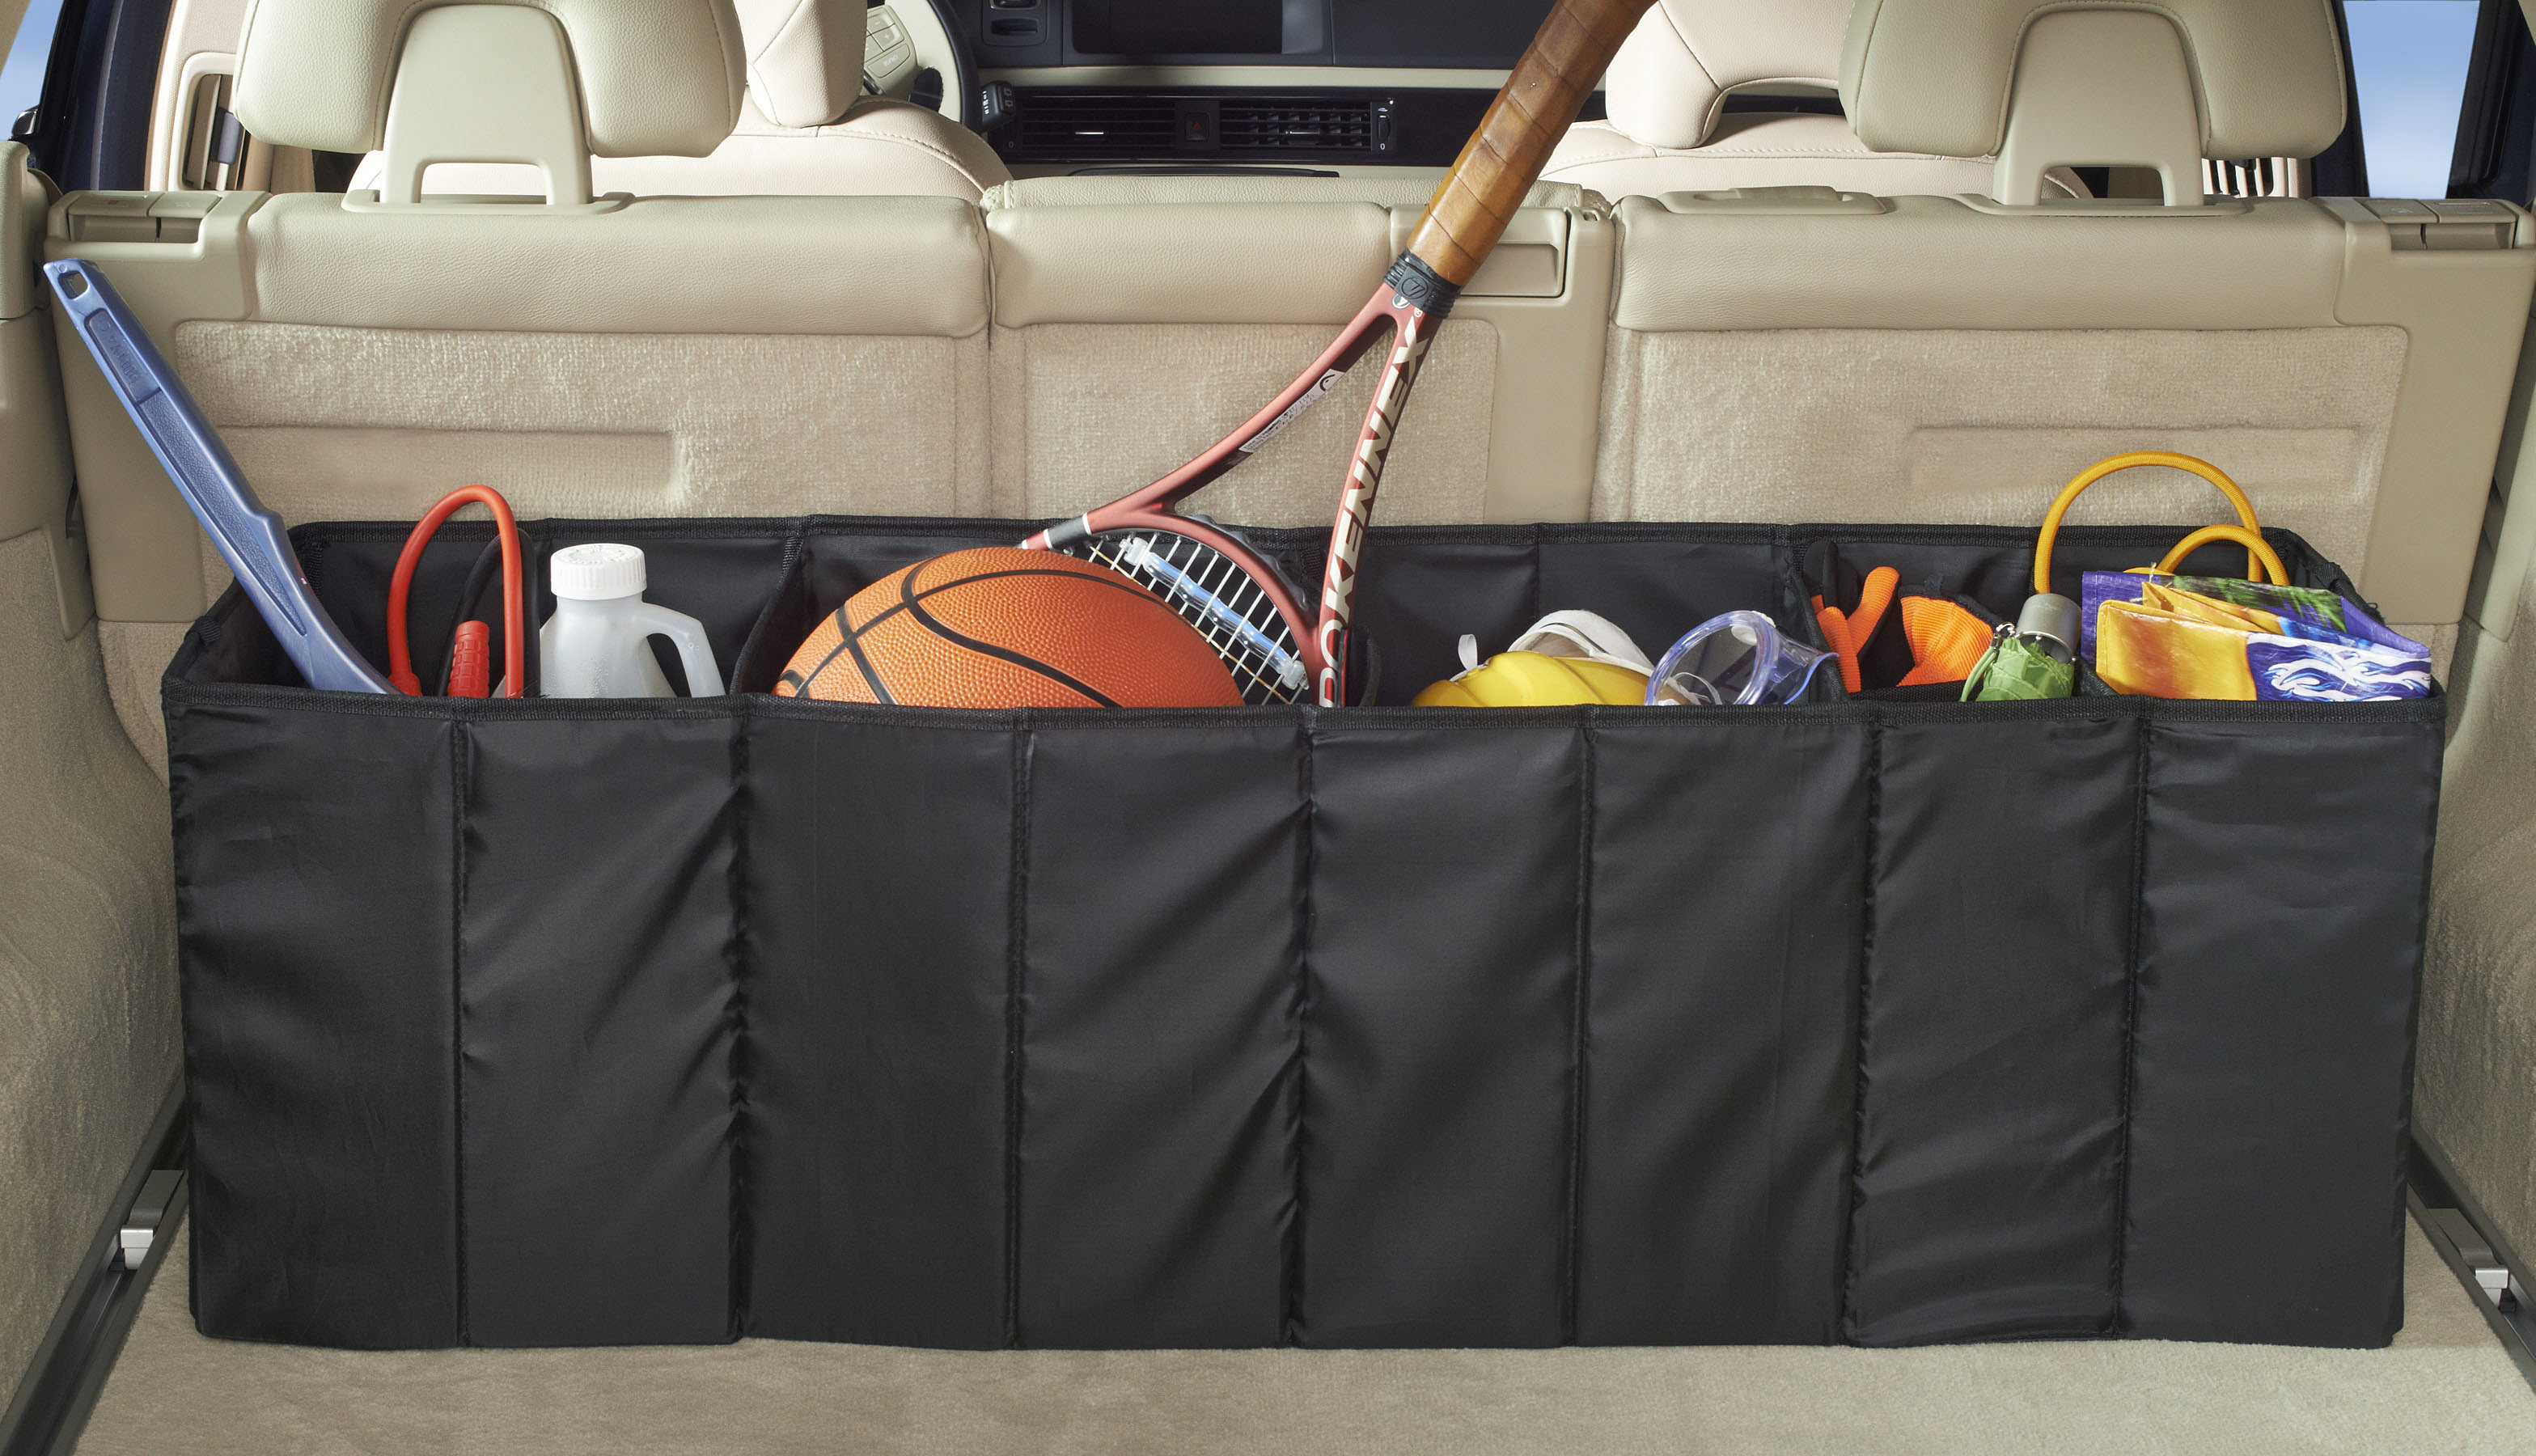 Organizers Help Box Up that Clutter In Your Car